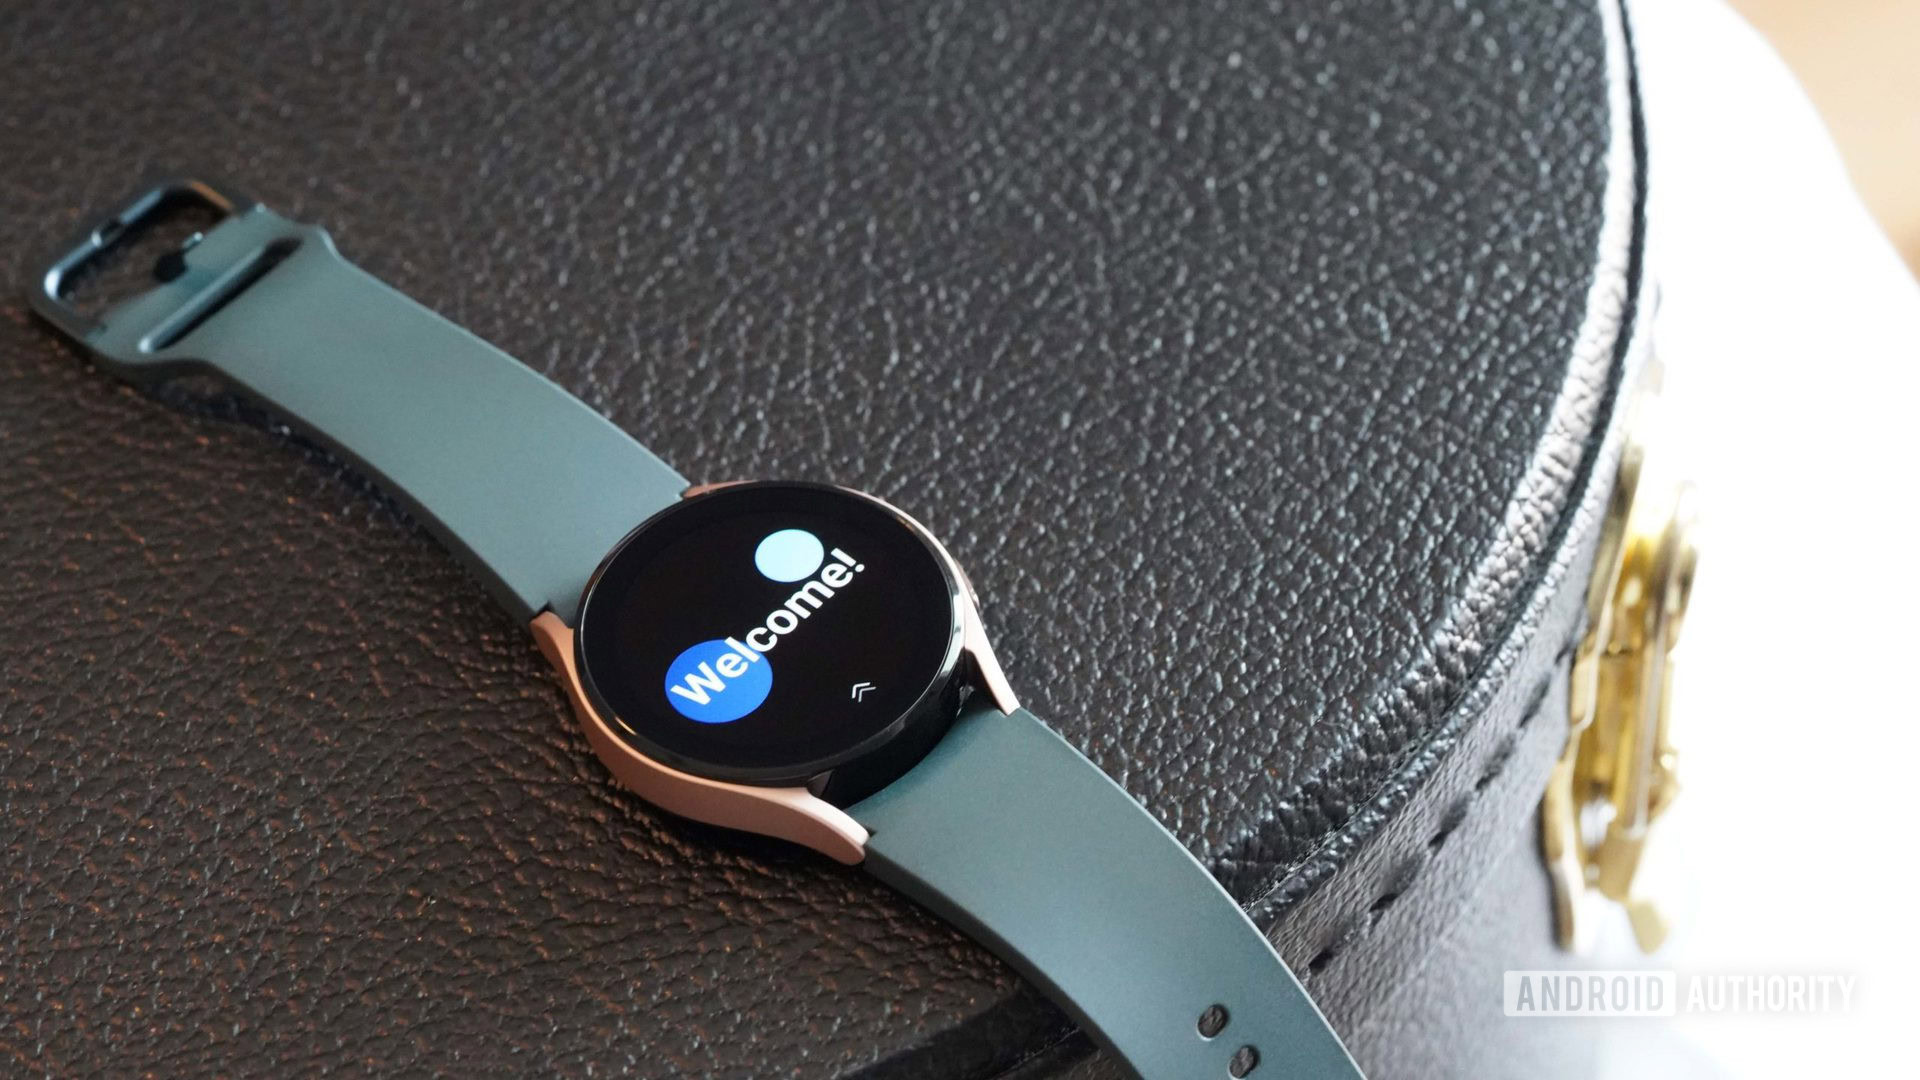 Setting up your Samsung smart watch with or without a phone